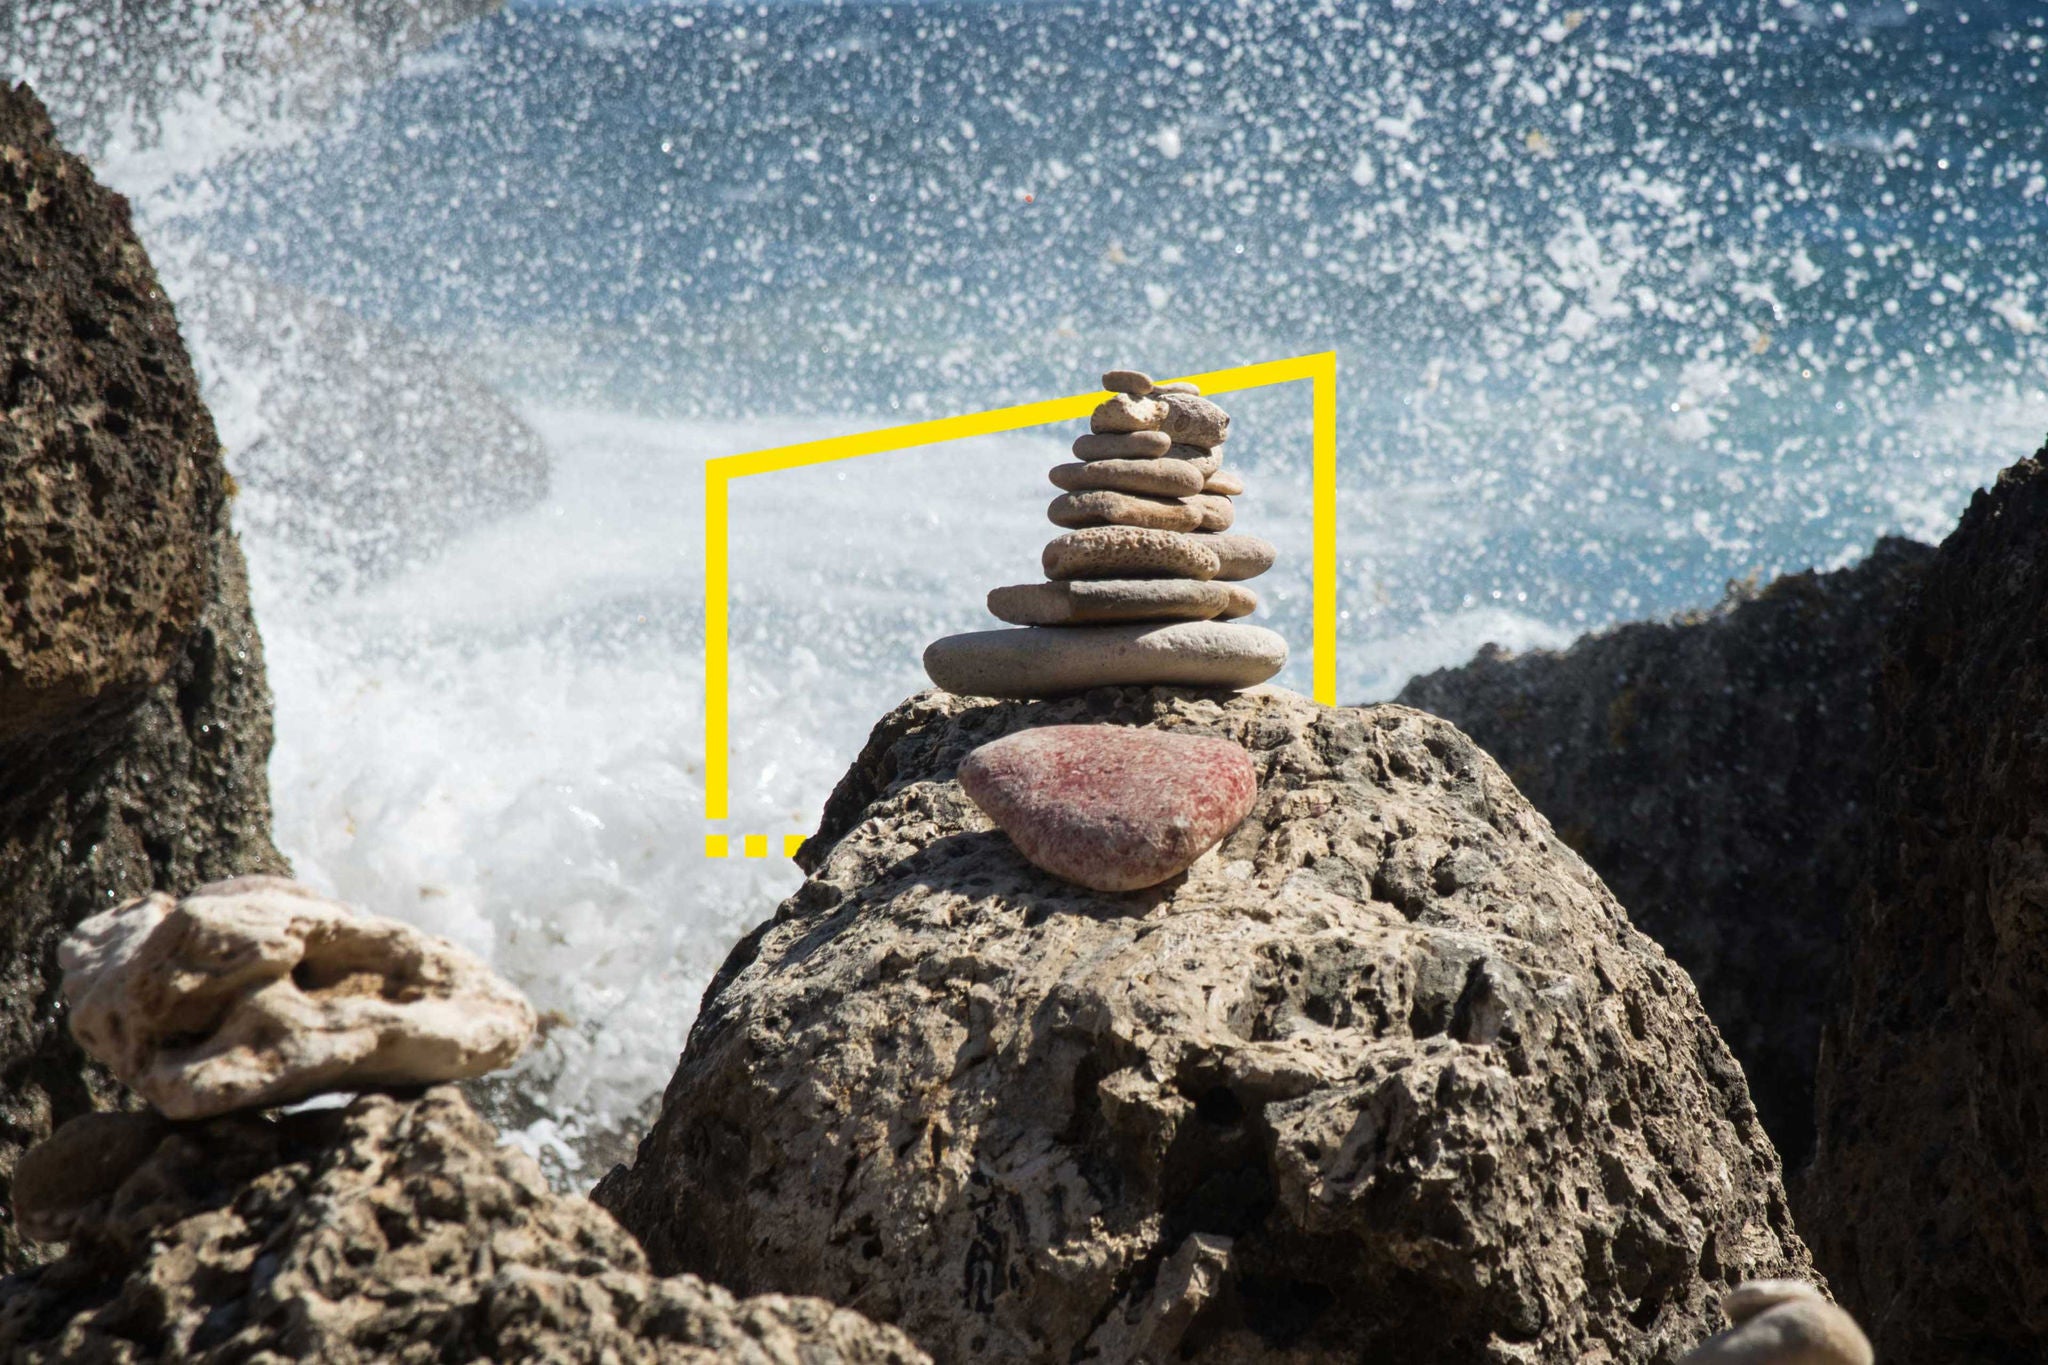 EY - Stone-stack-on-large-ocean-rocks-among-the-waves